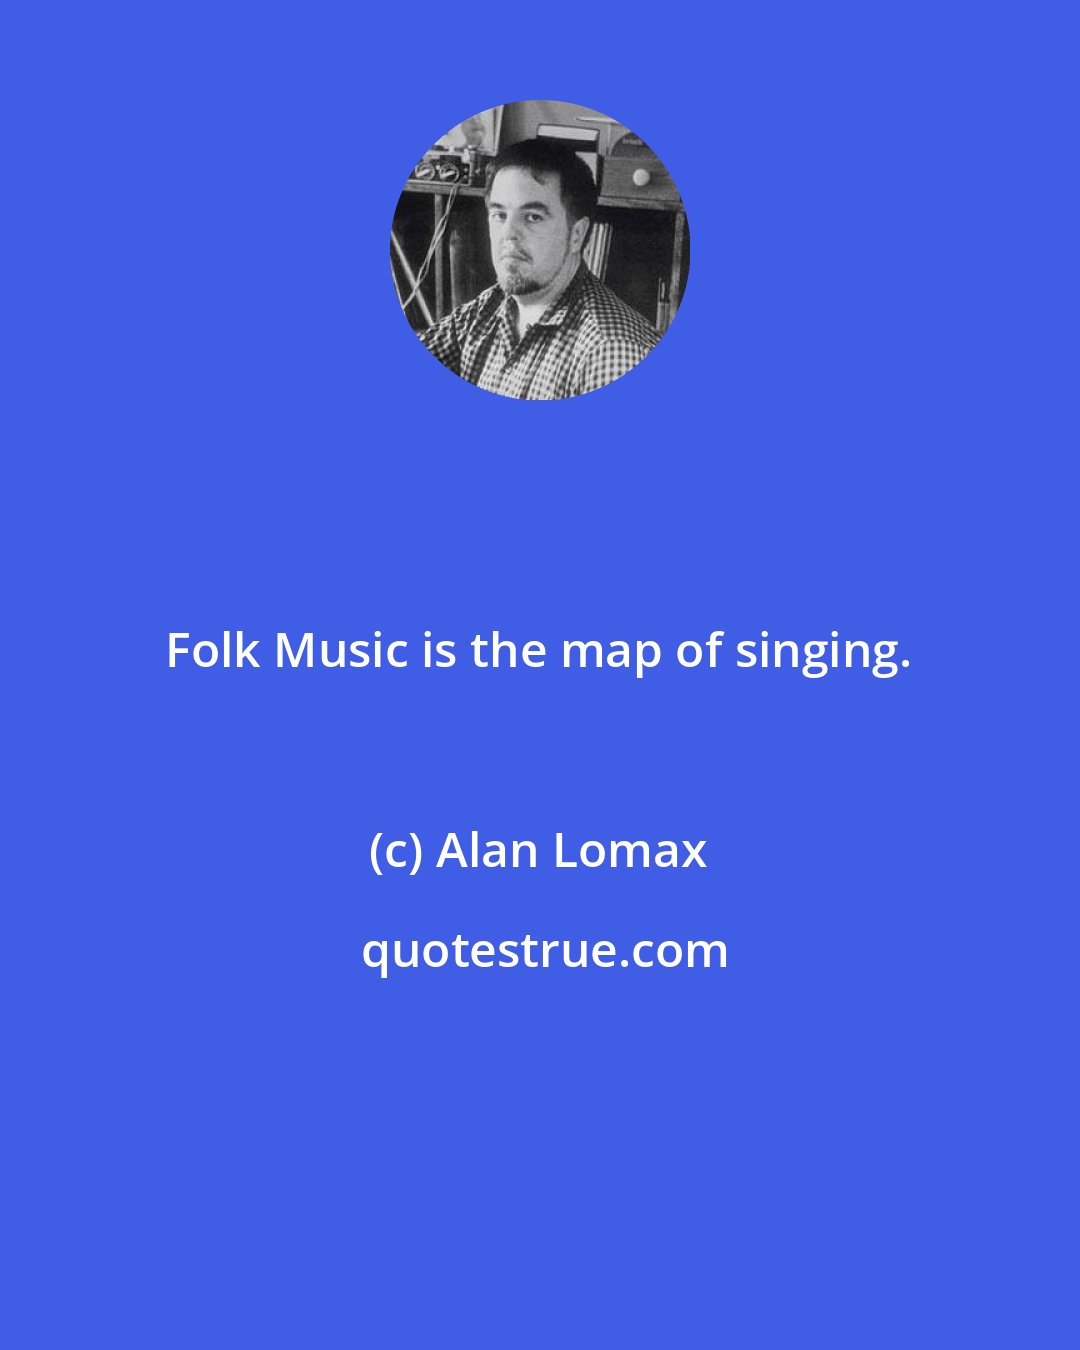 Alan Lomax: Folk Music is the map of singing.